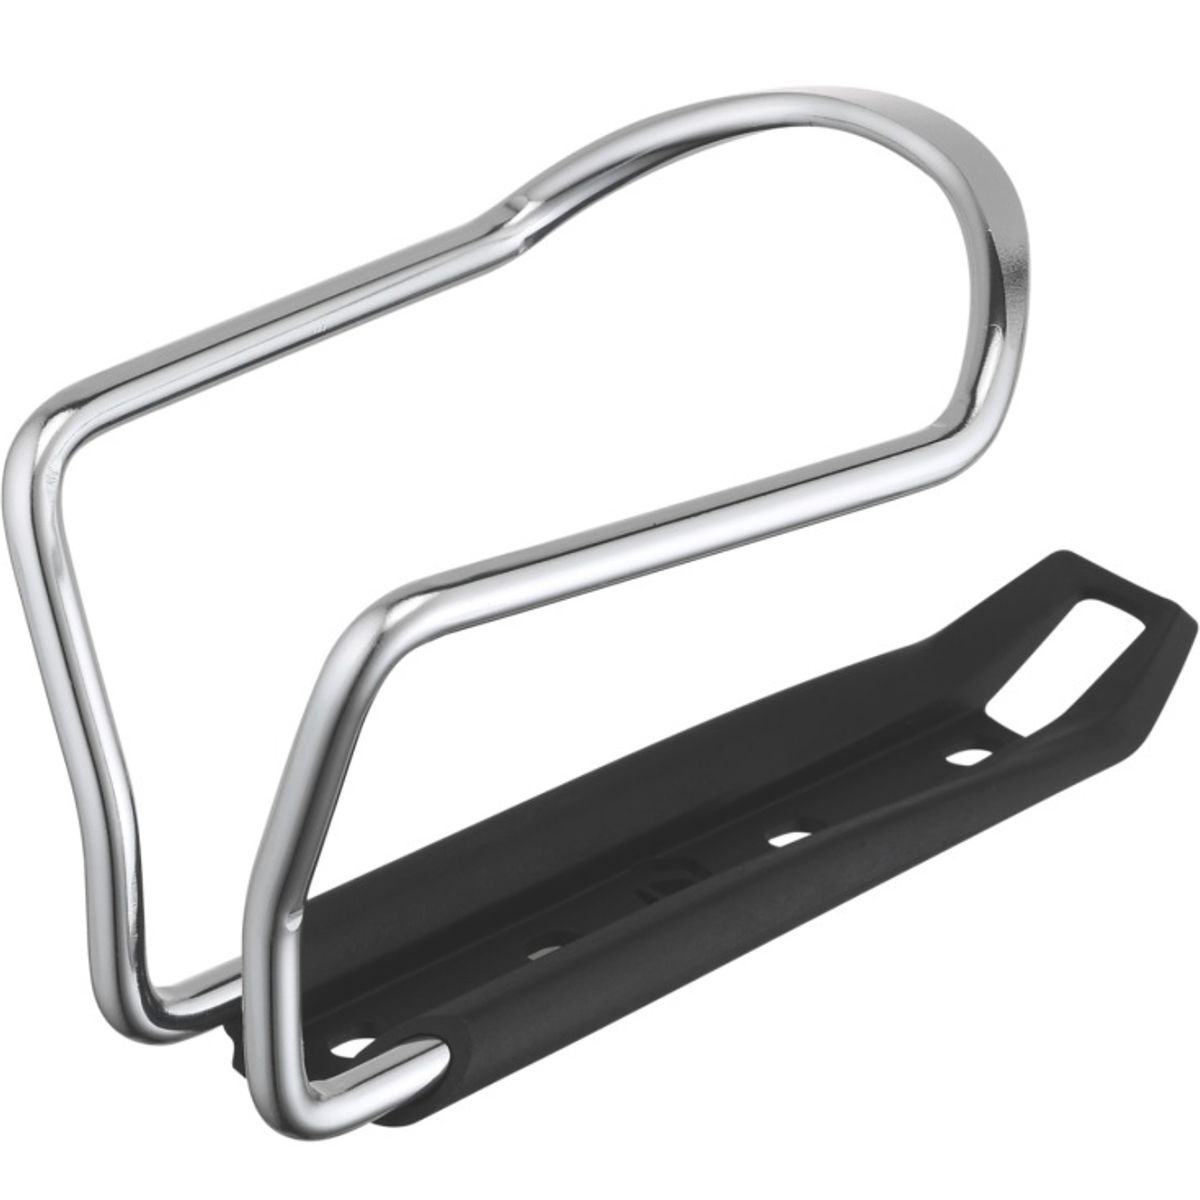 Syncros Alloy Comp 3.0 Bottle Cage